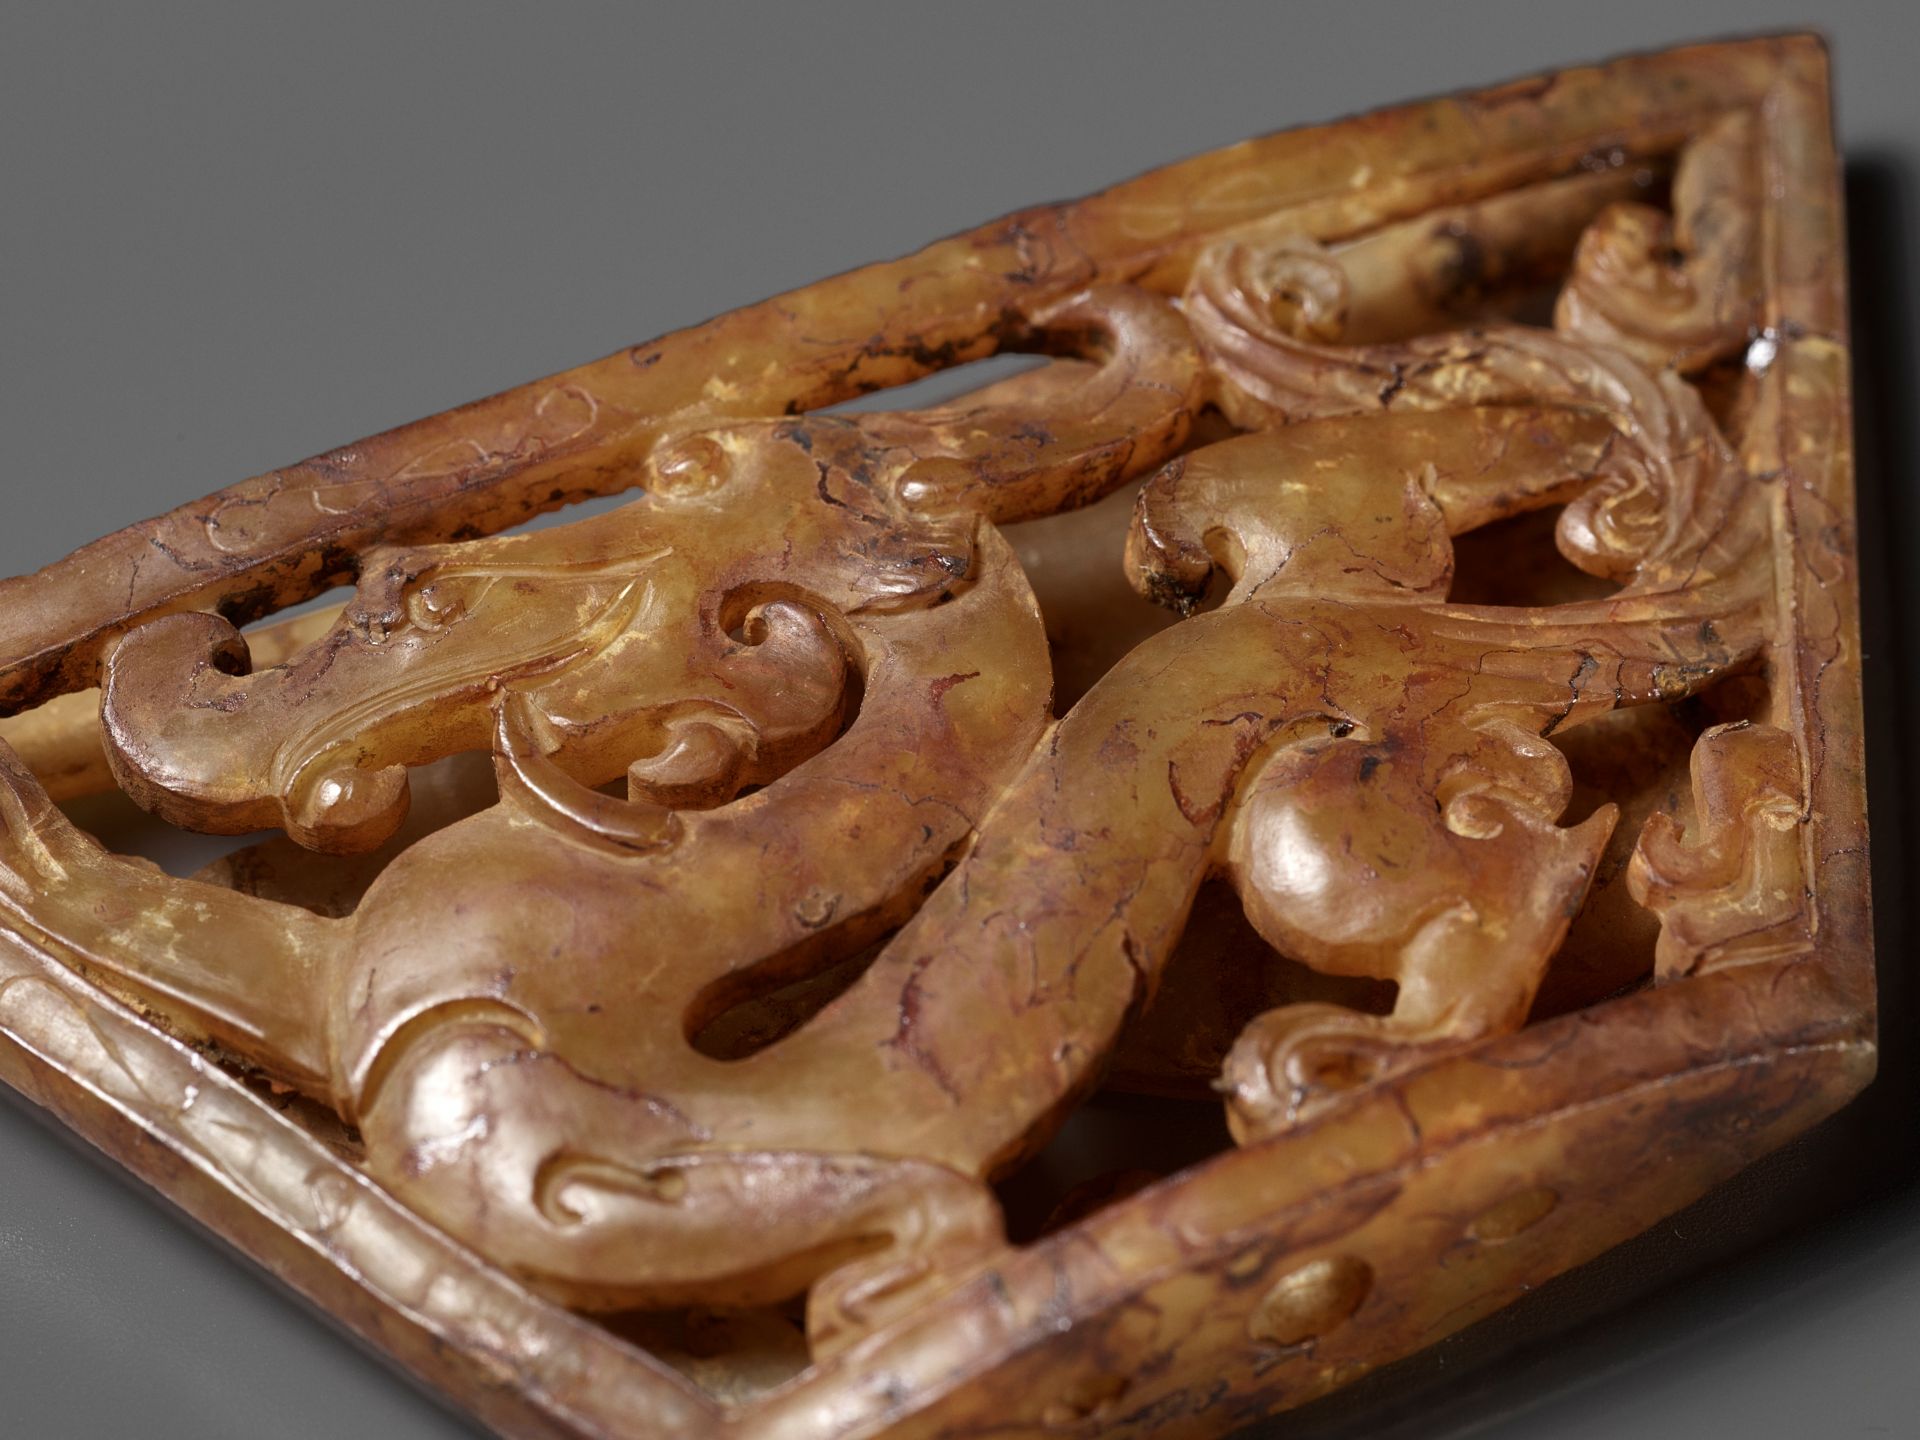 A RARE AND COMPLETE SET OF FOUR JADE OPENWORK SWORD FITTINGS, WESTERN HAN DYNASTY - Image 28 of 29